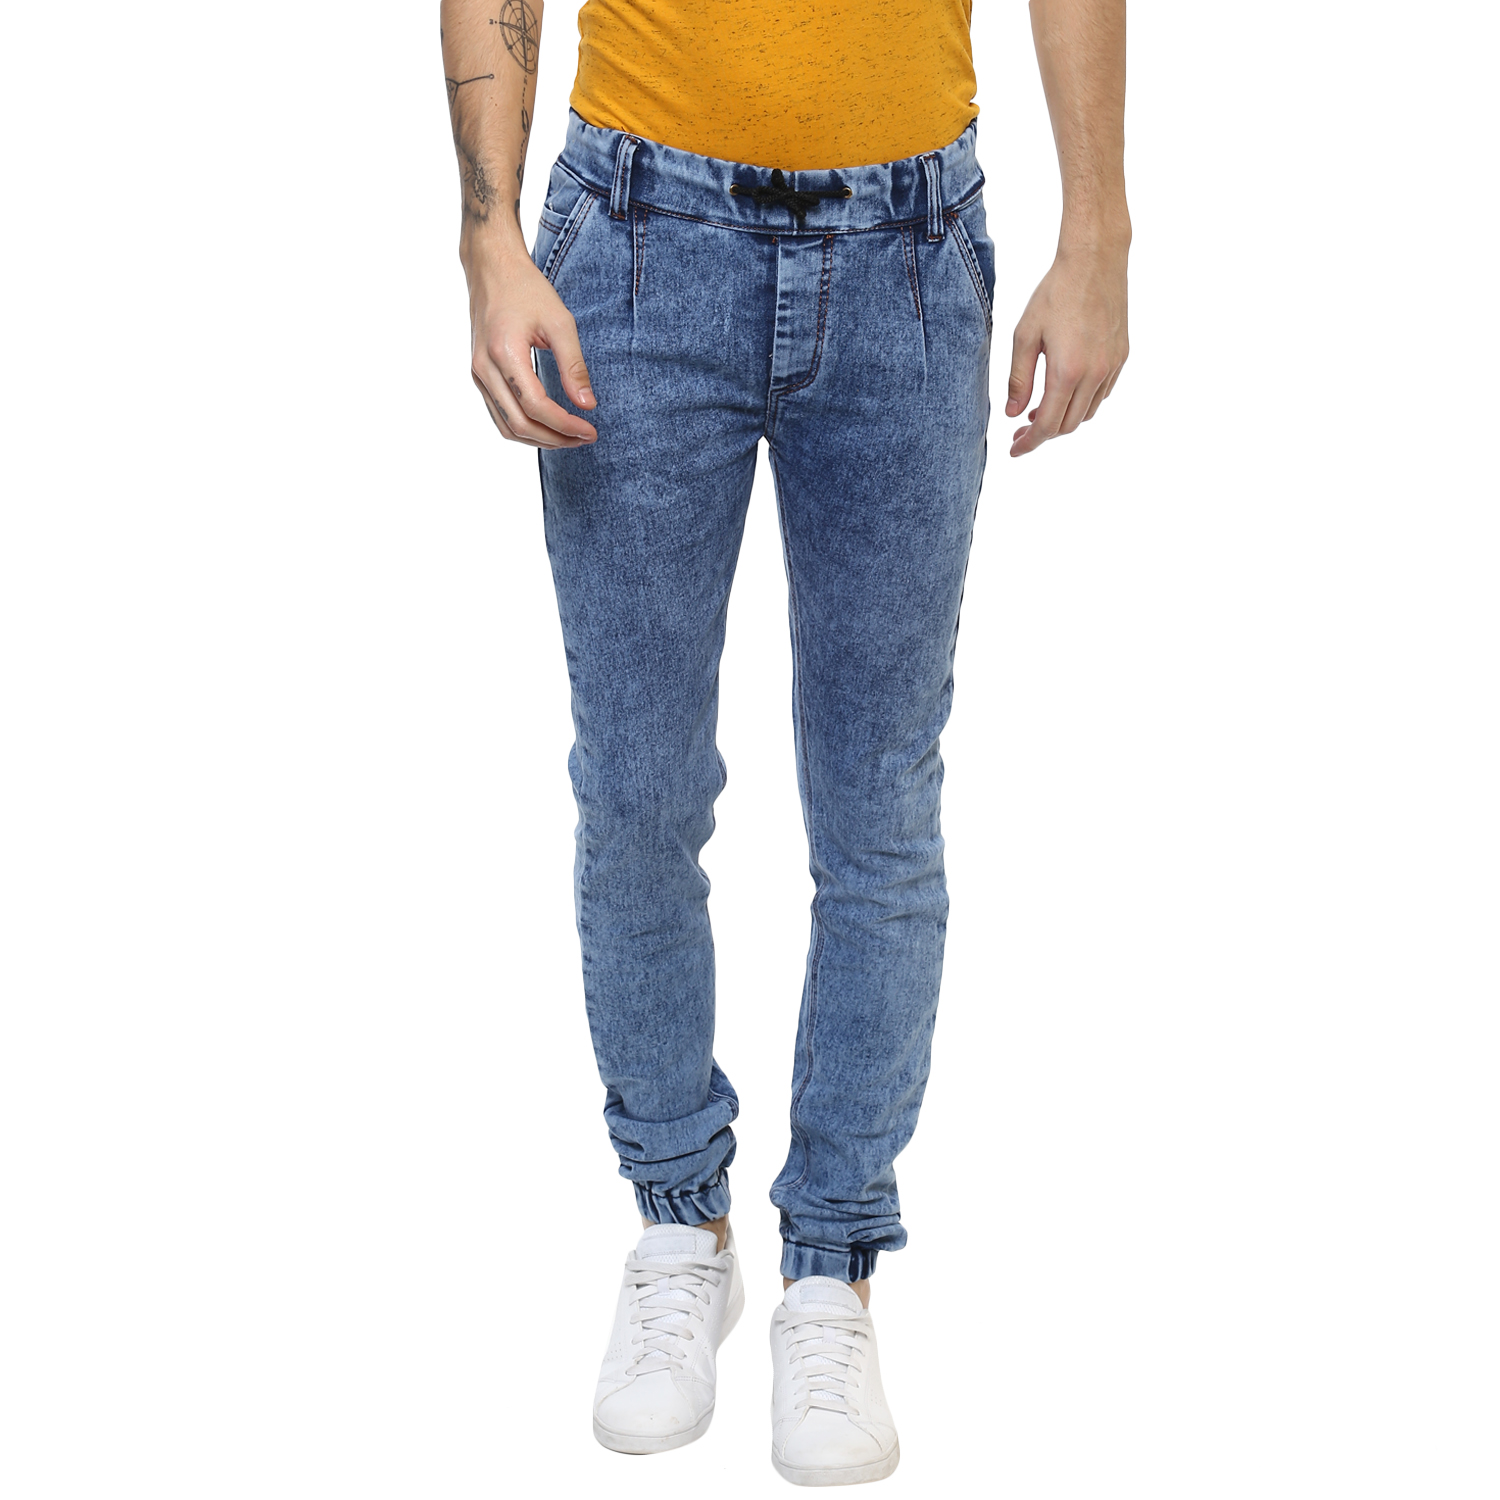 Buy Urbano Fashion Men's Slim Fit Blue Jeans Online @ ₹819 from ShopClues